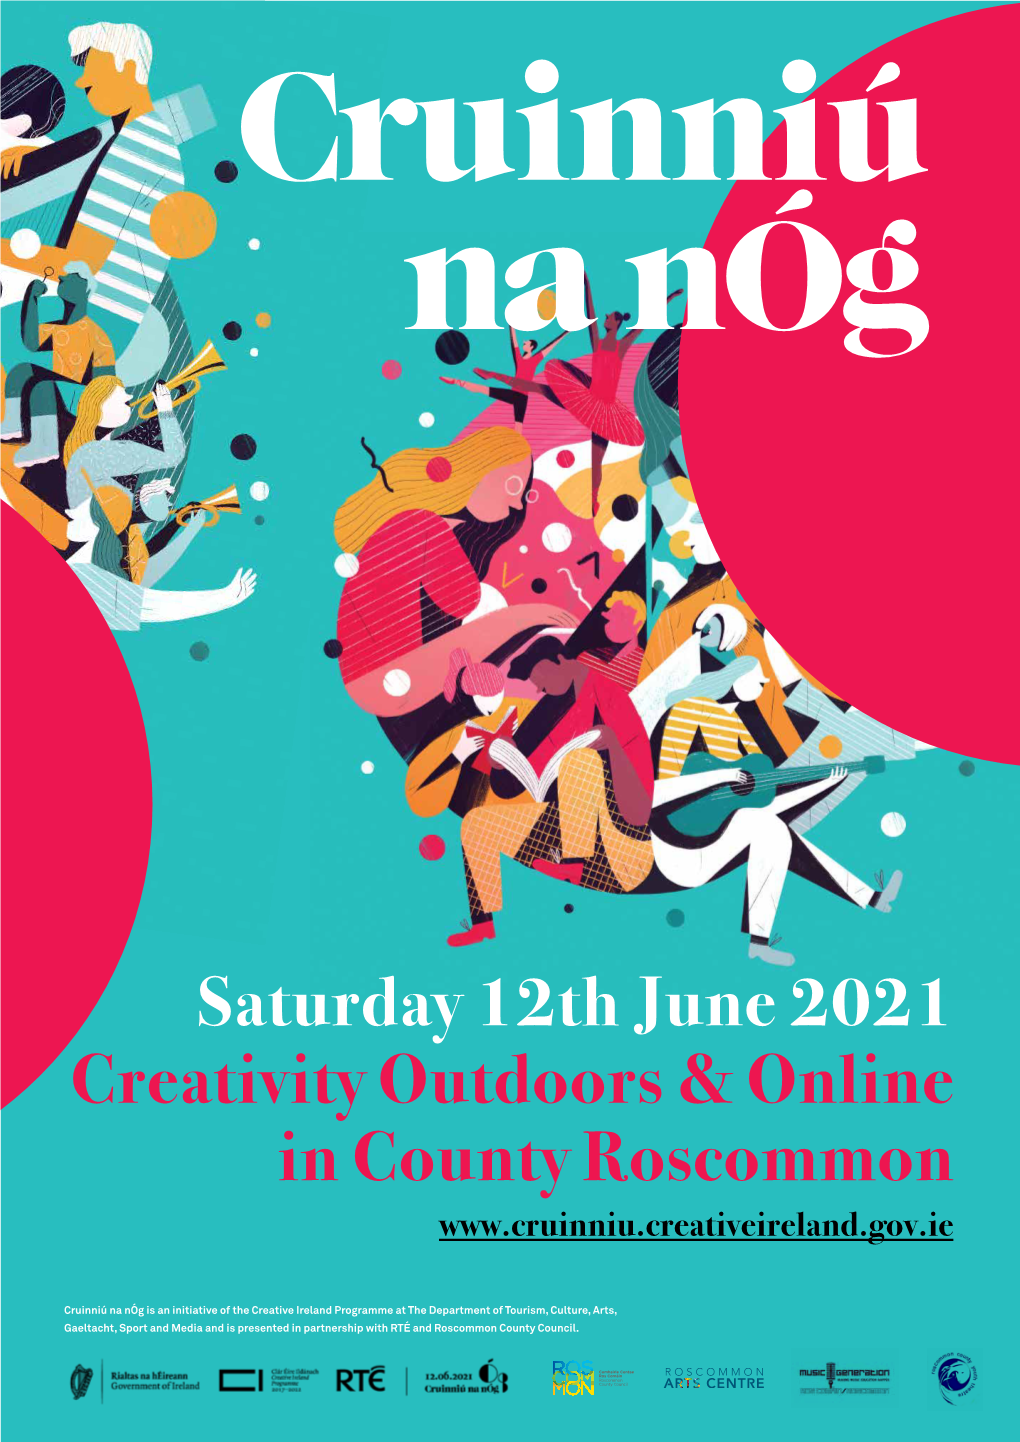 Creativity Outdoors & Online in County Roscommon